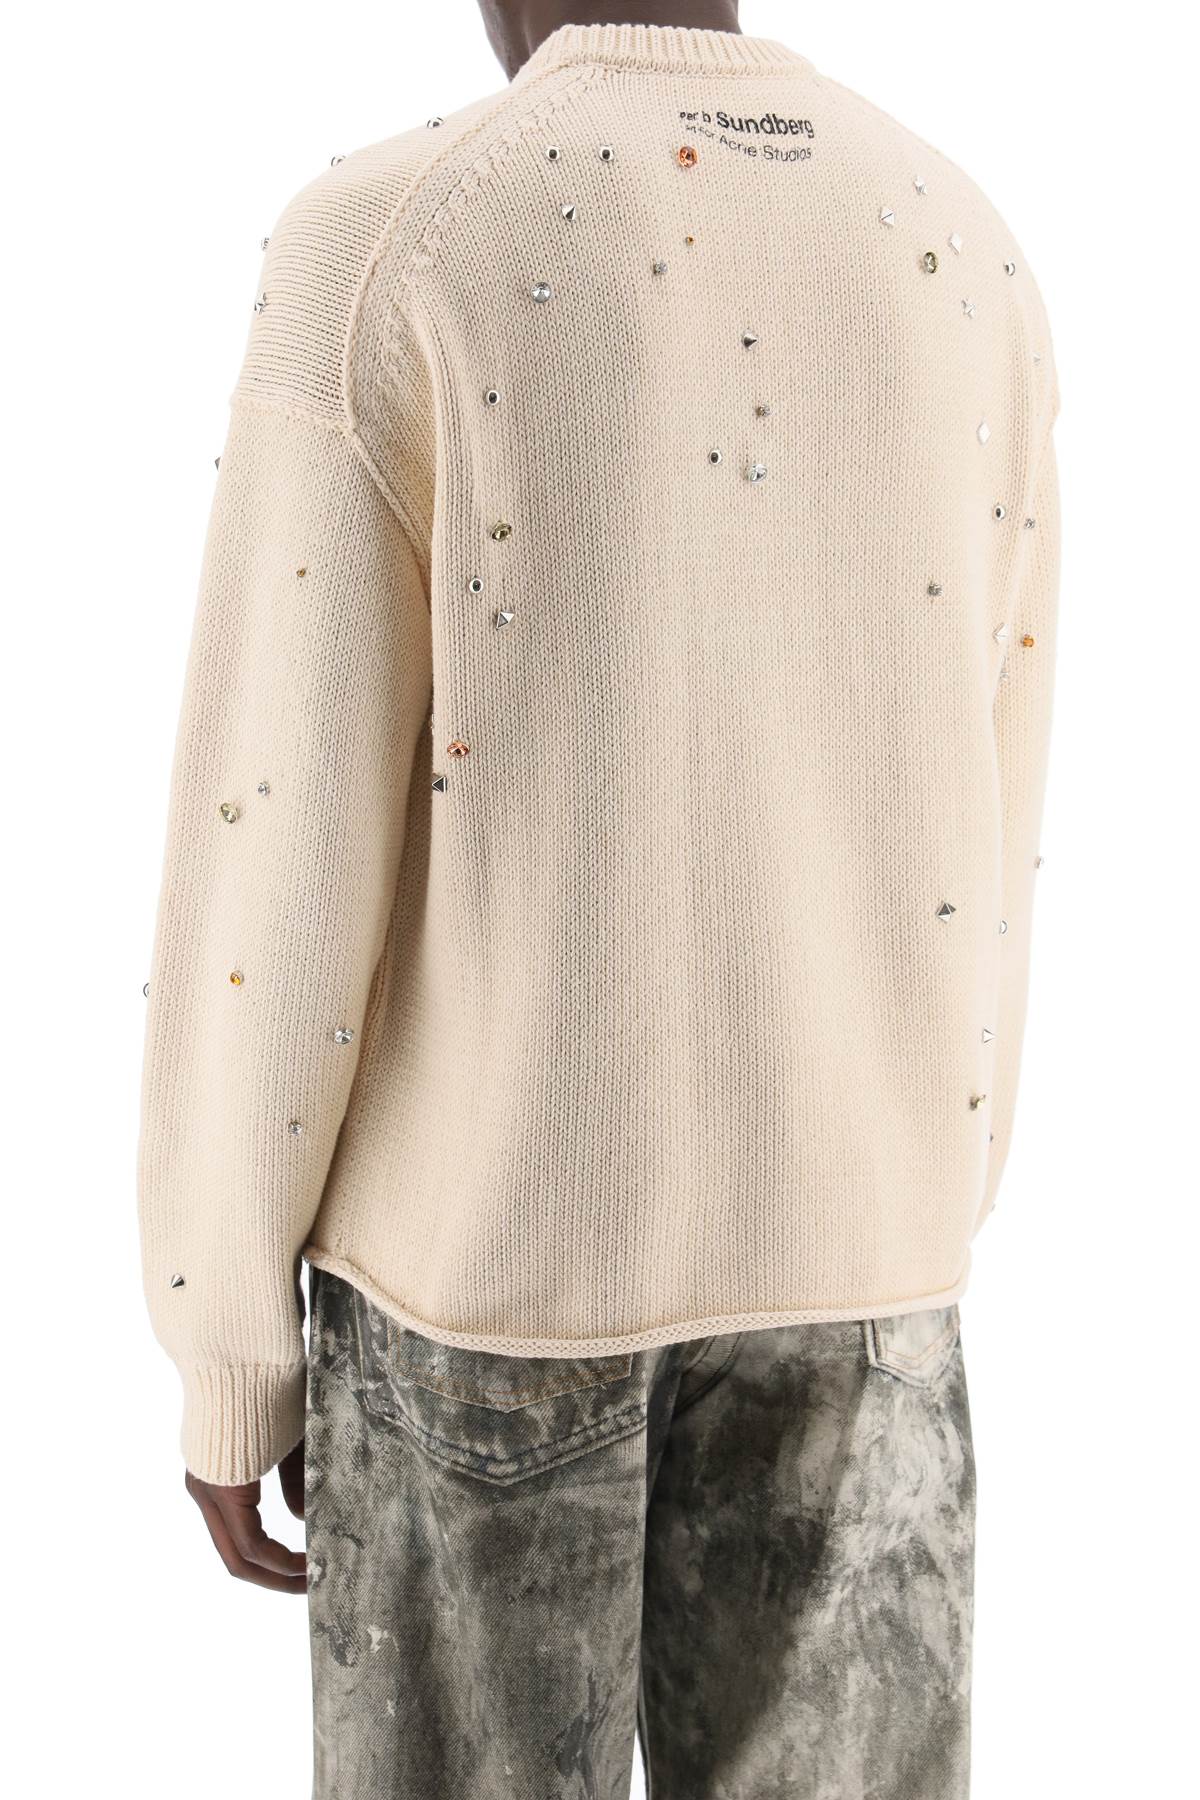 Acne Studios Acne studios "studded pullover with animation